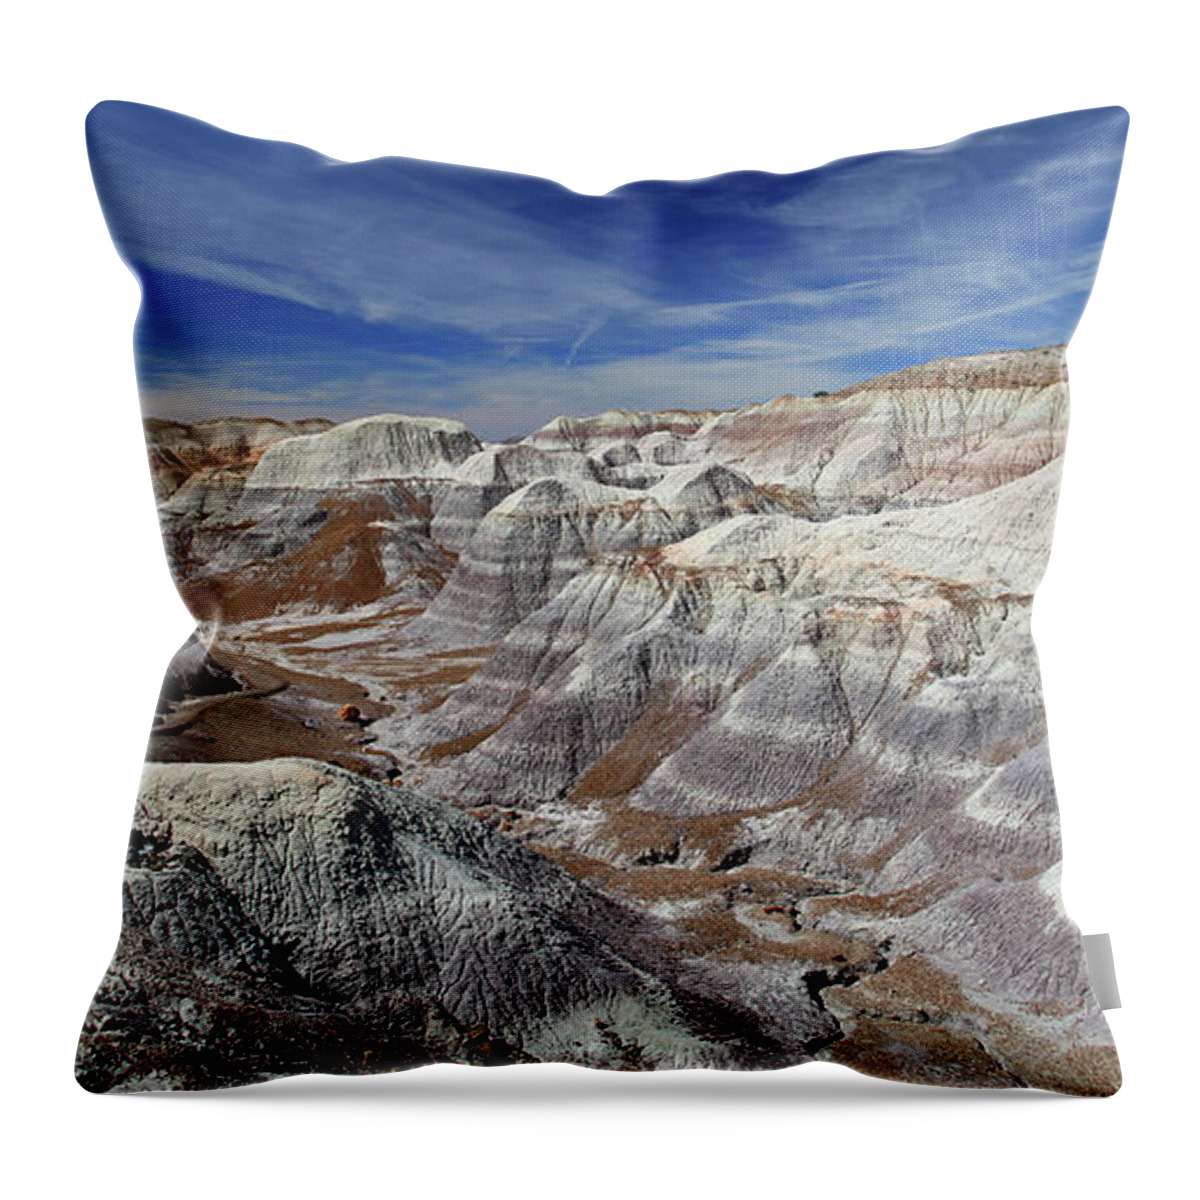 Arizona Throw Pillow featuring the photograph Into The Past by Gary Kaylor